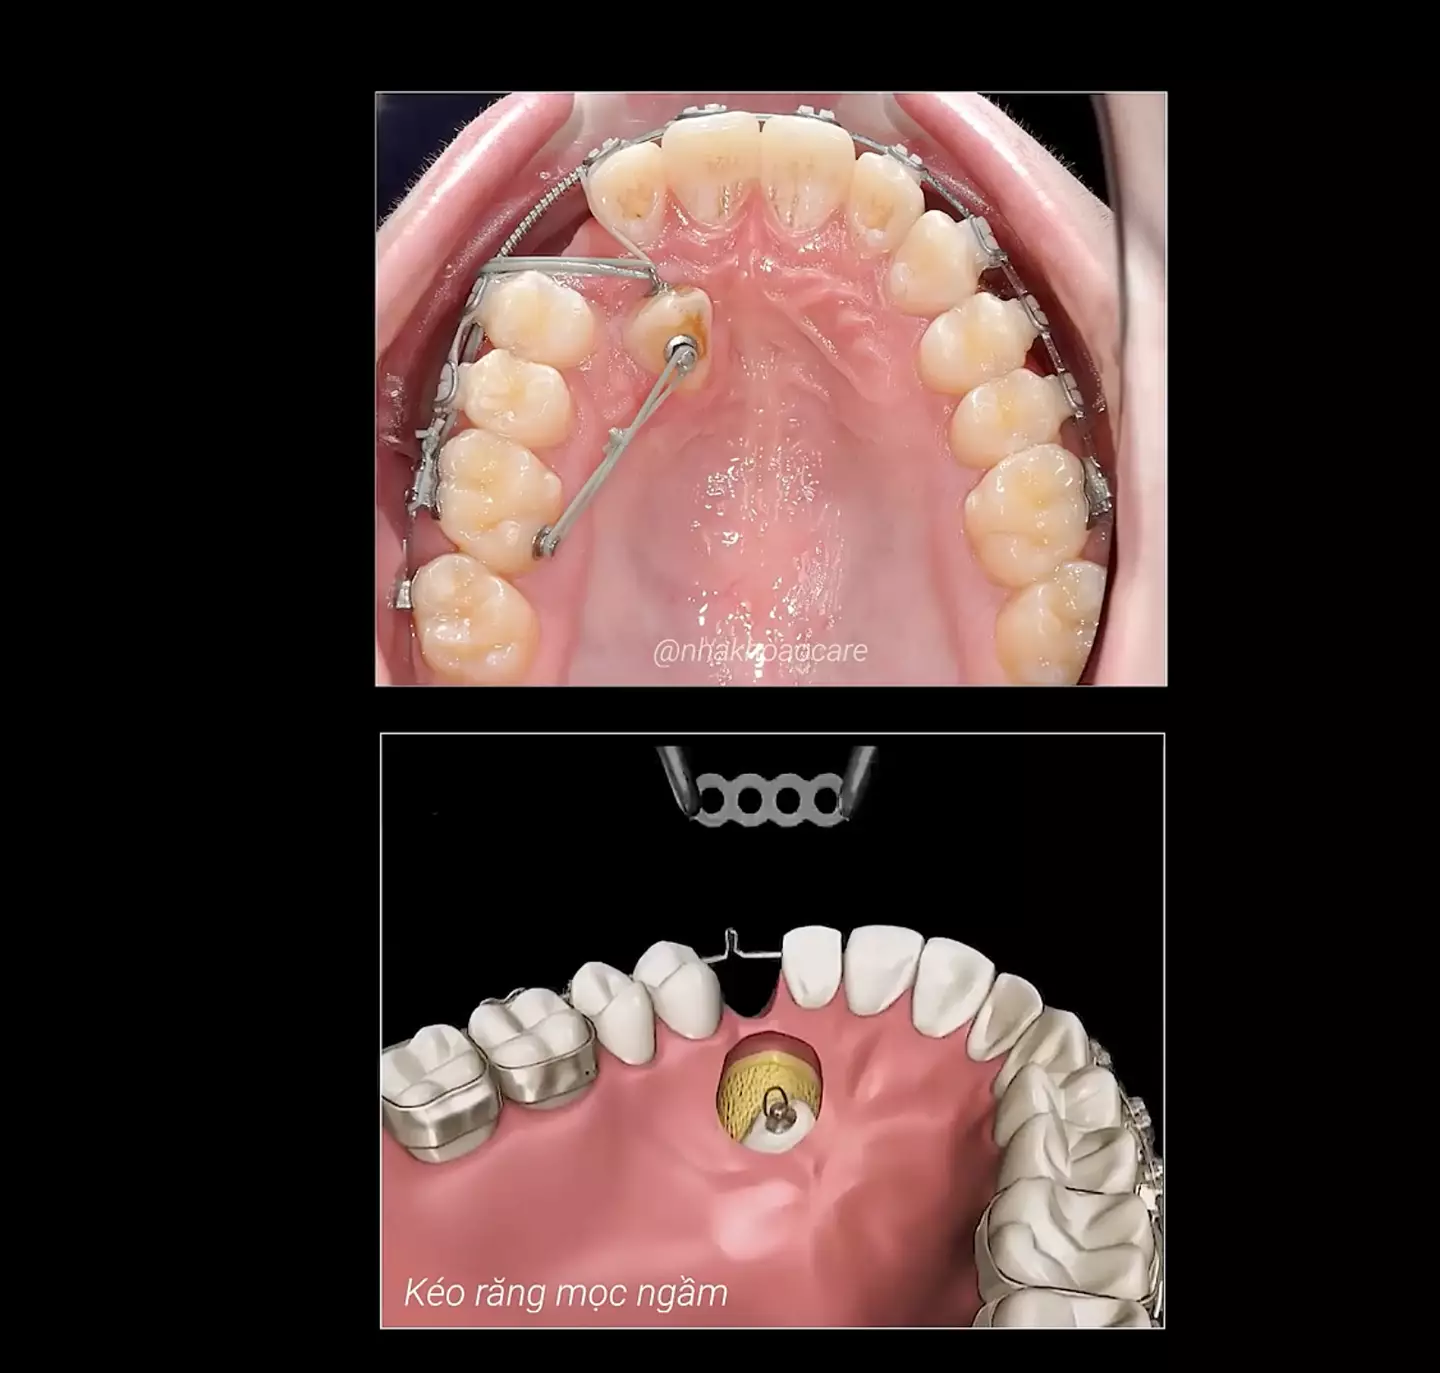 Social media users have begun cringing after watching a video showing how braces force teeth into place.